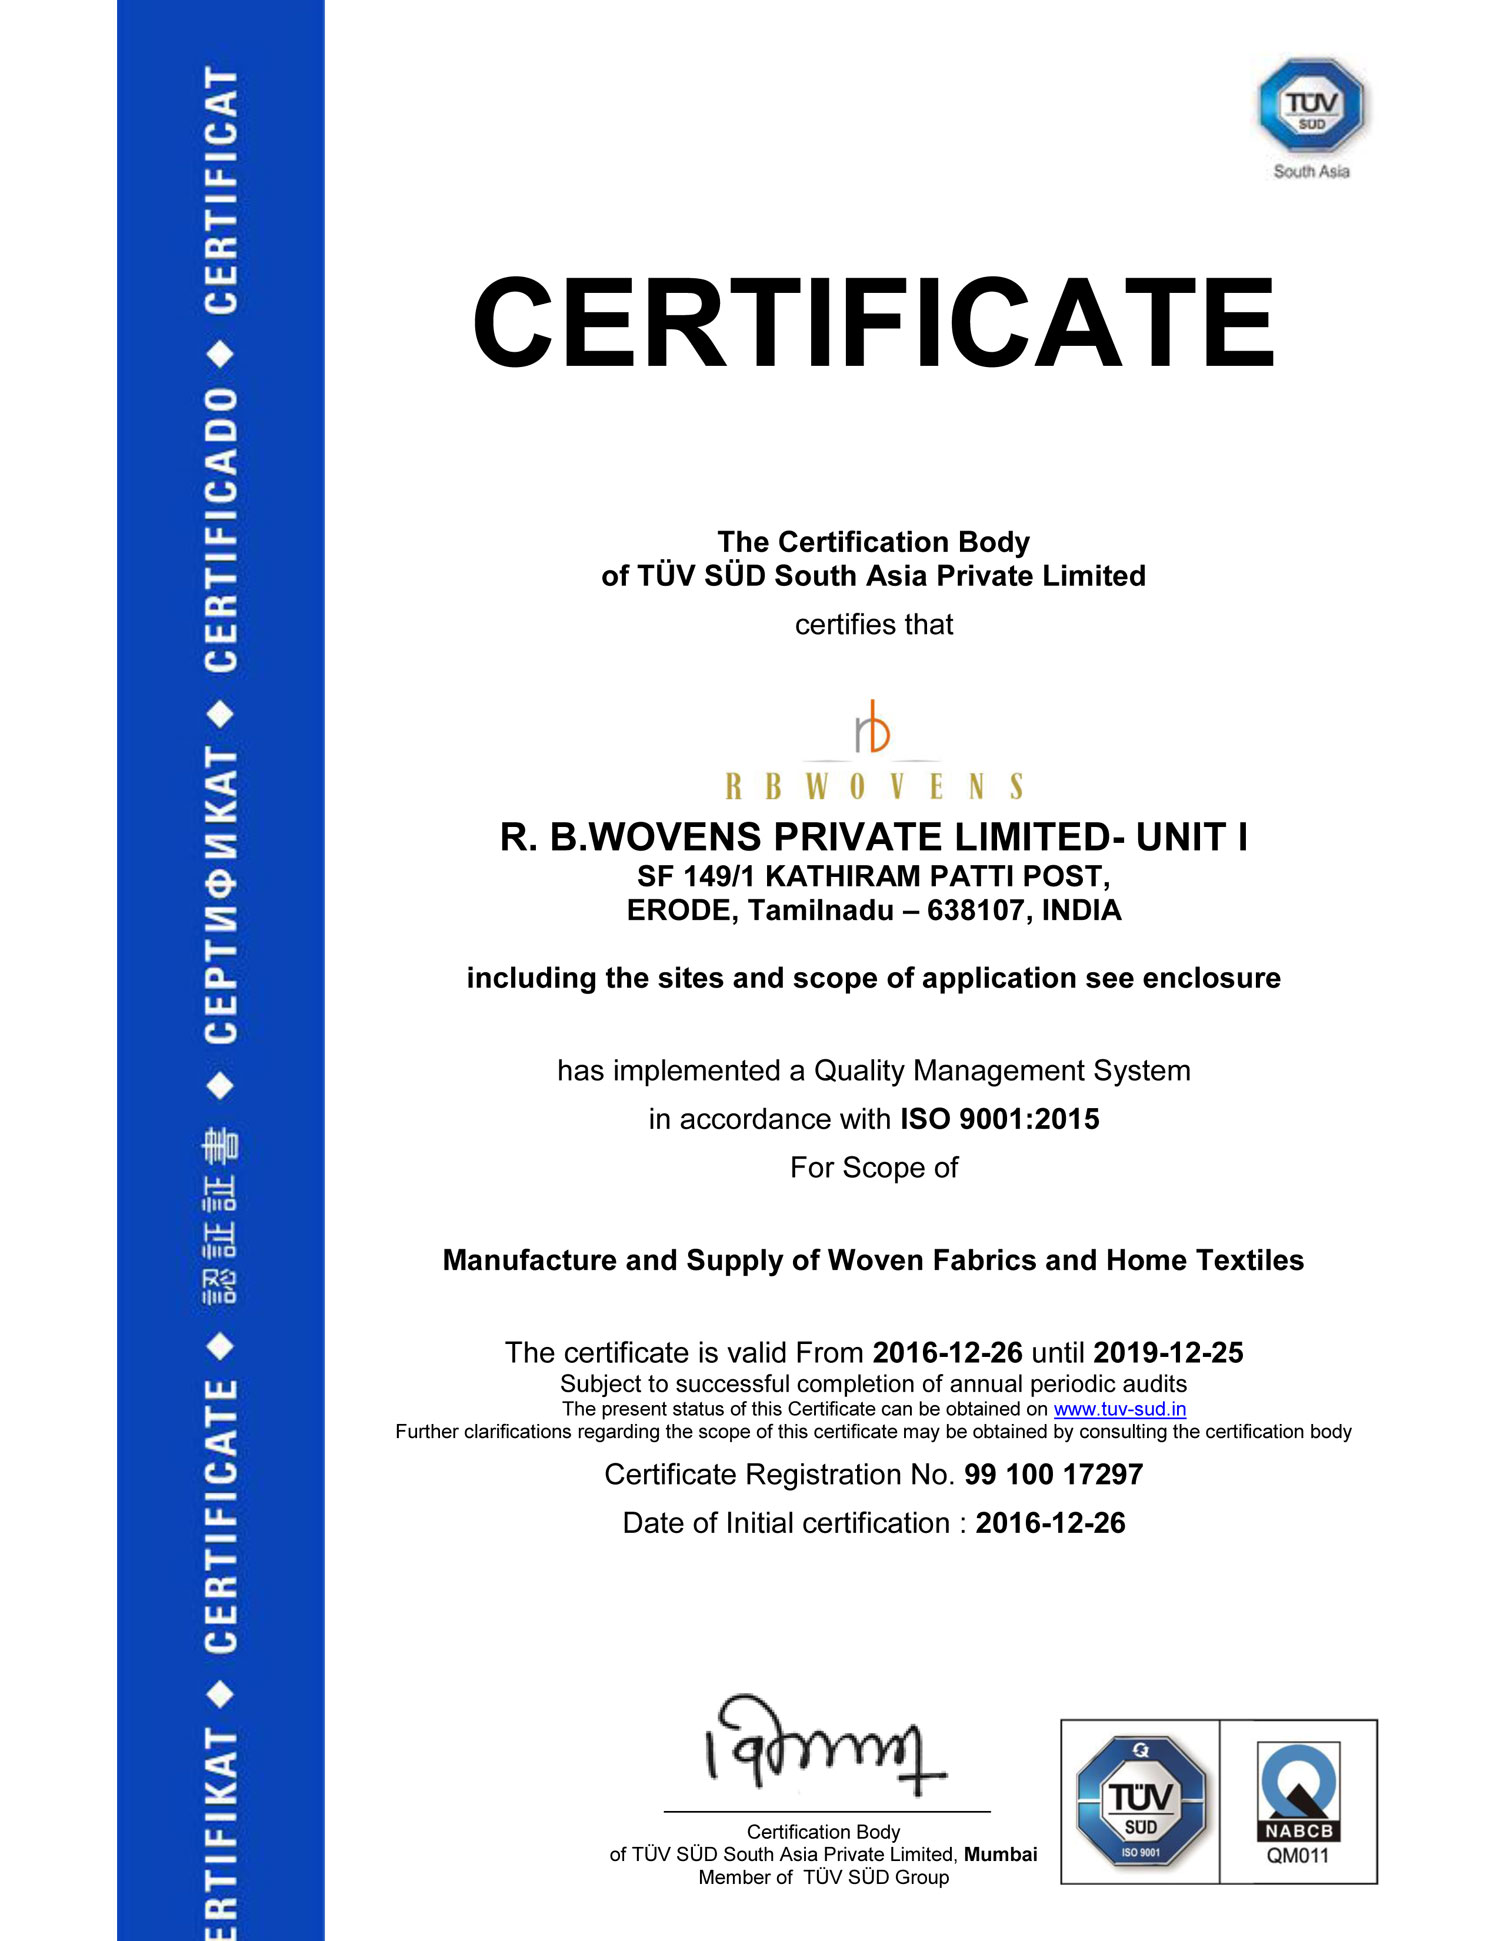 ISO 9001 Quality Management System (QMS)